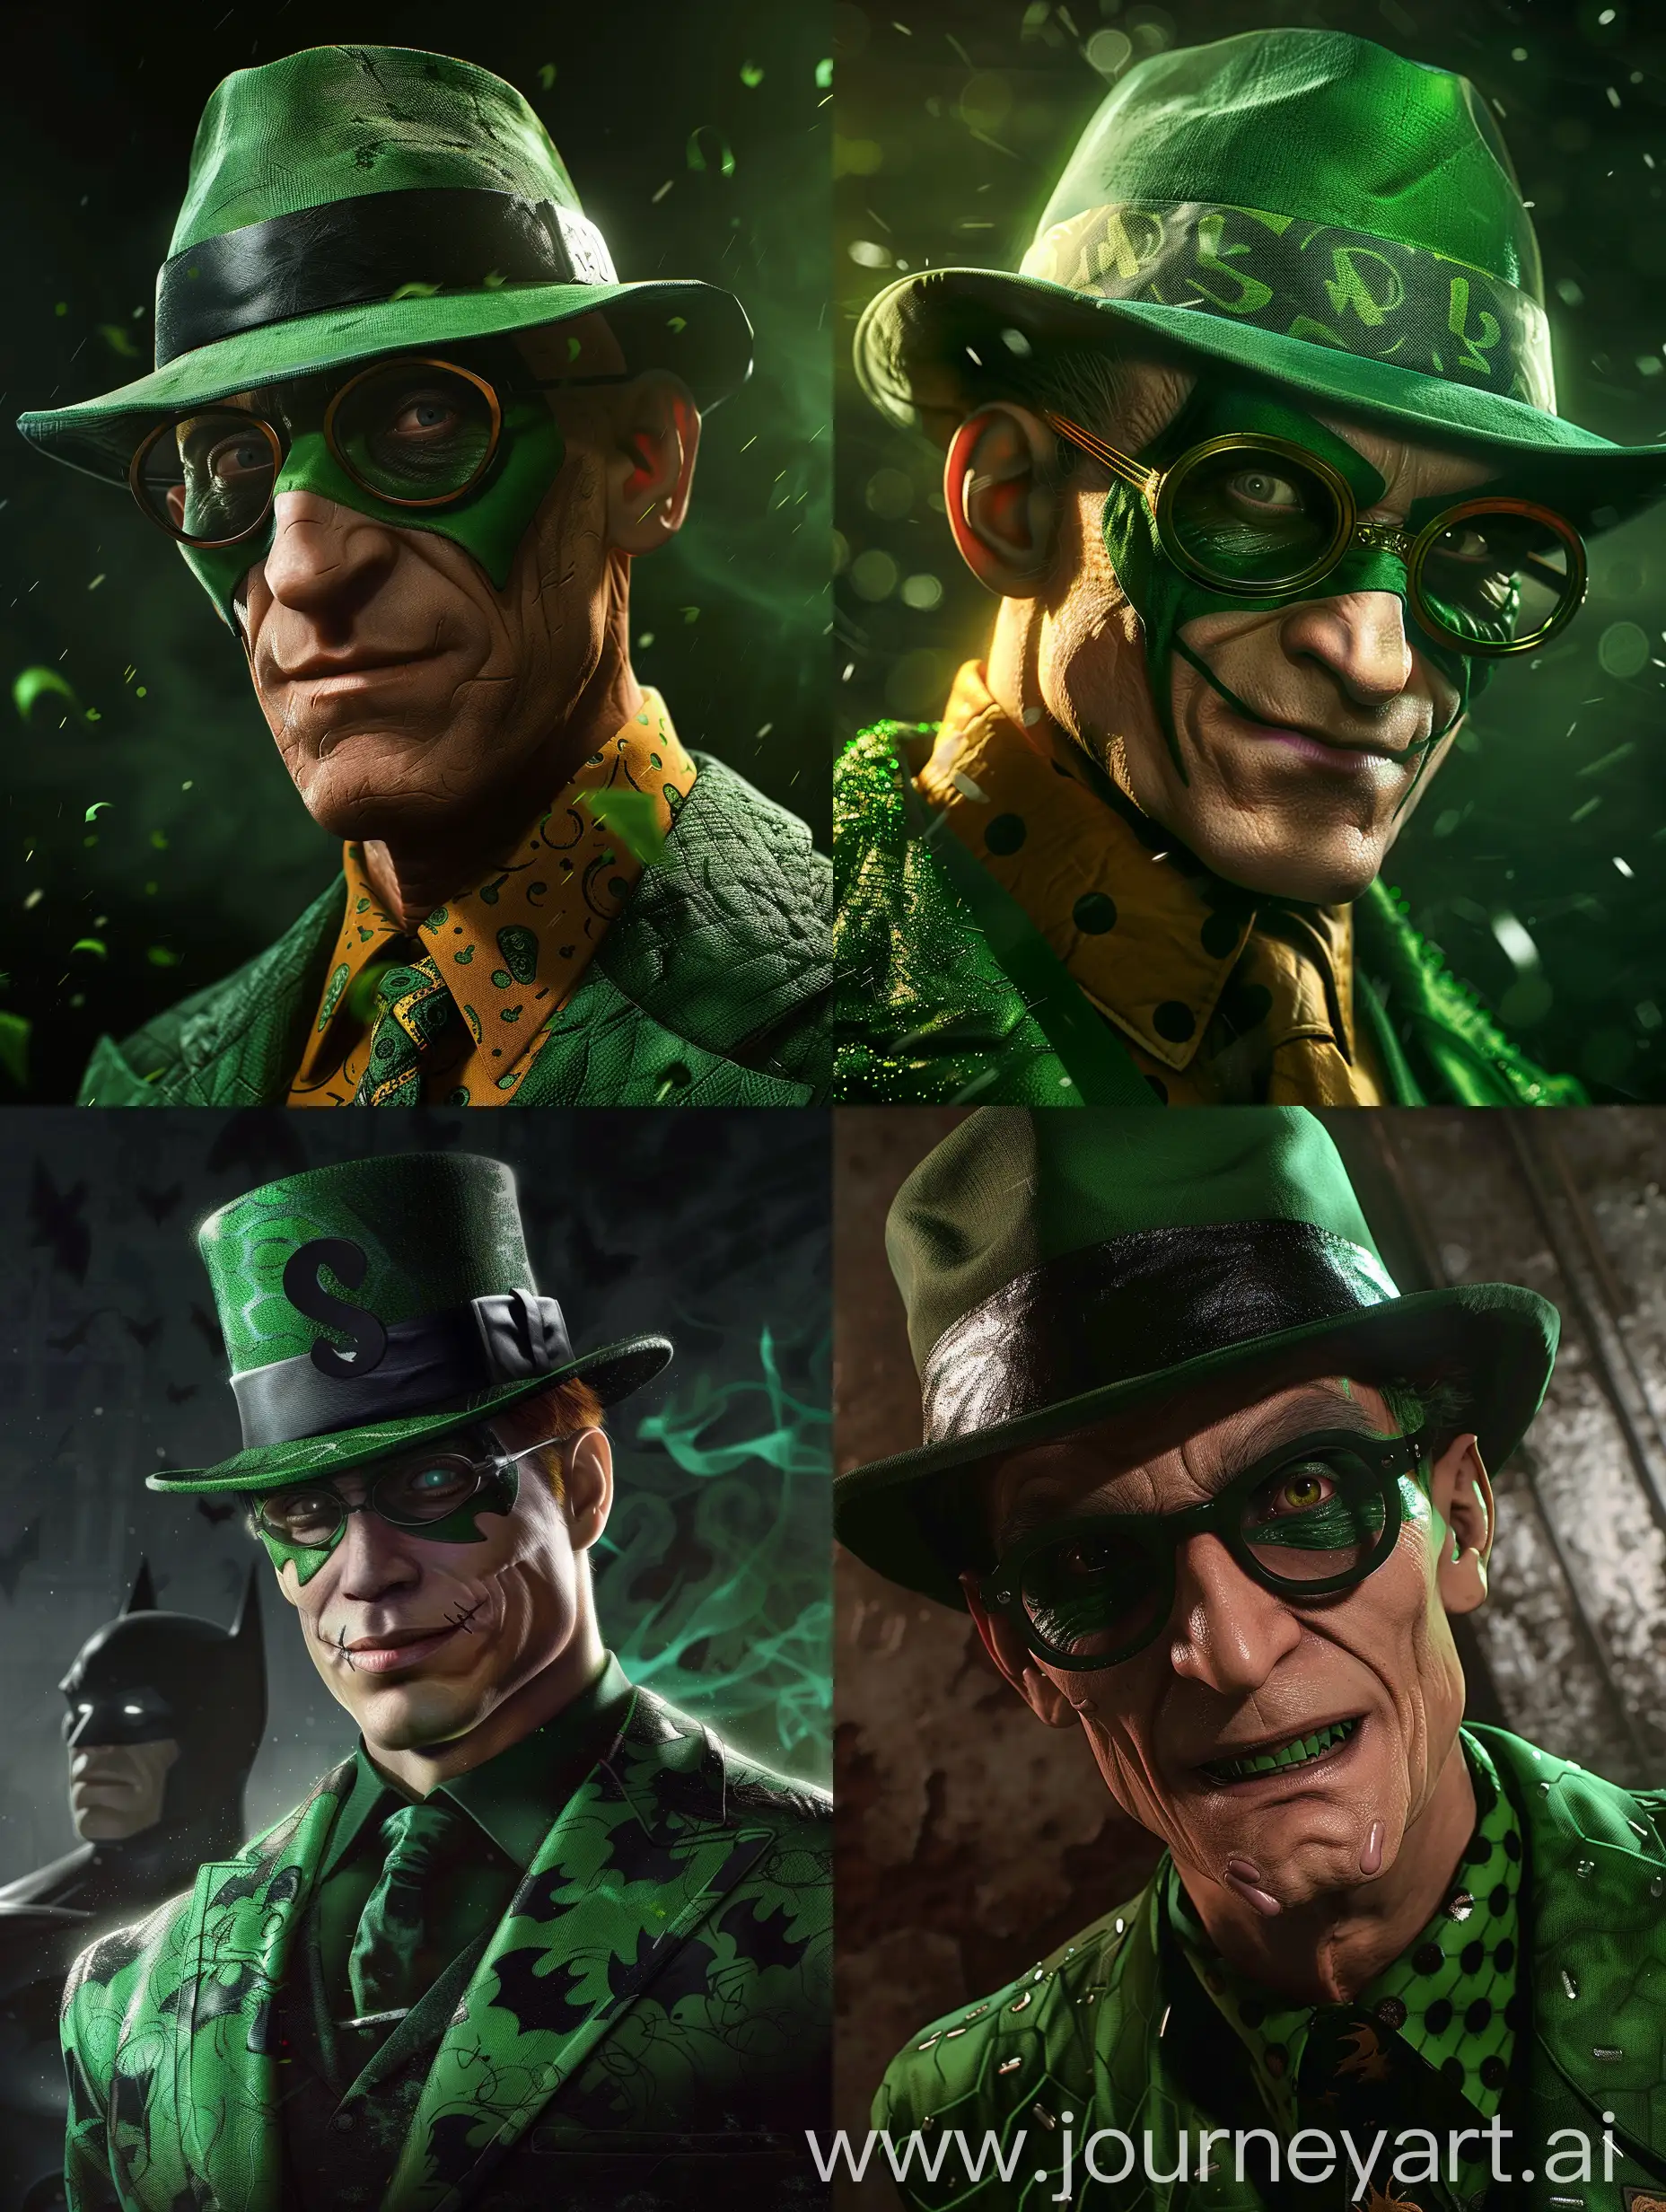 The Riddler from the game "Batman" 